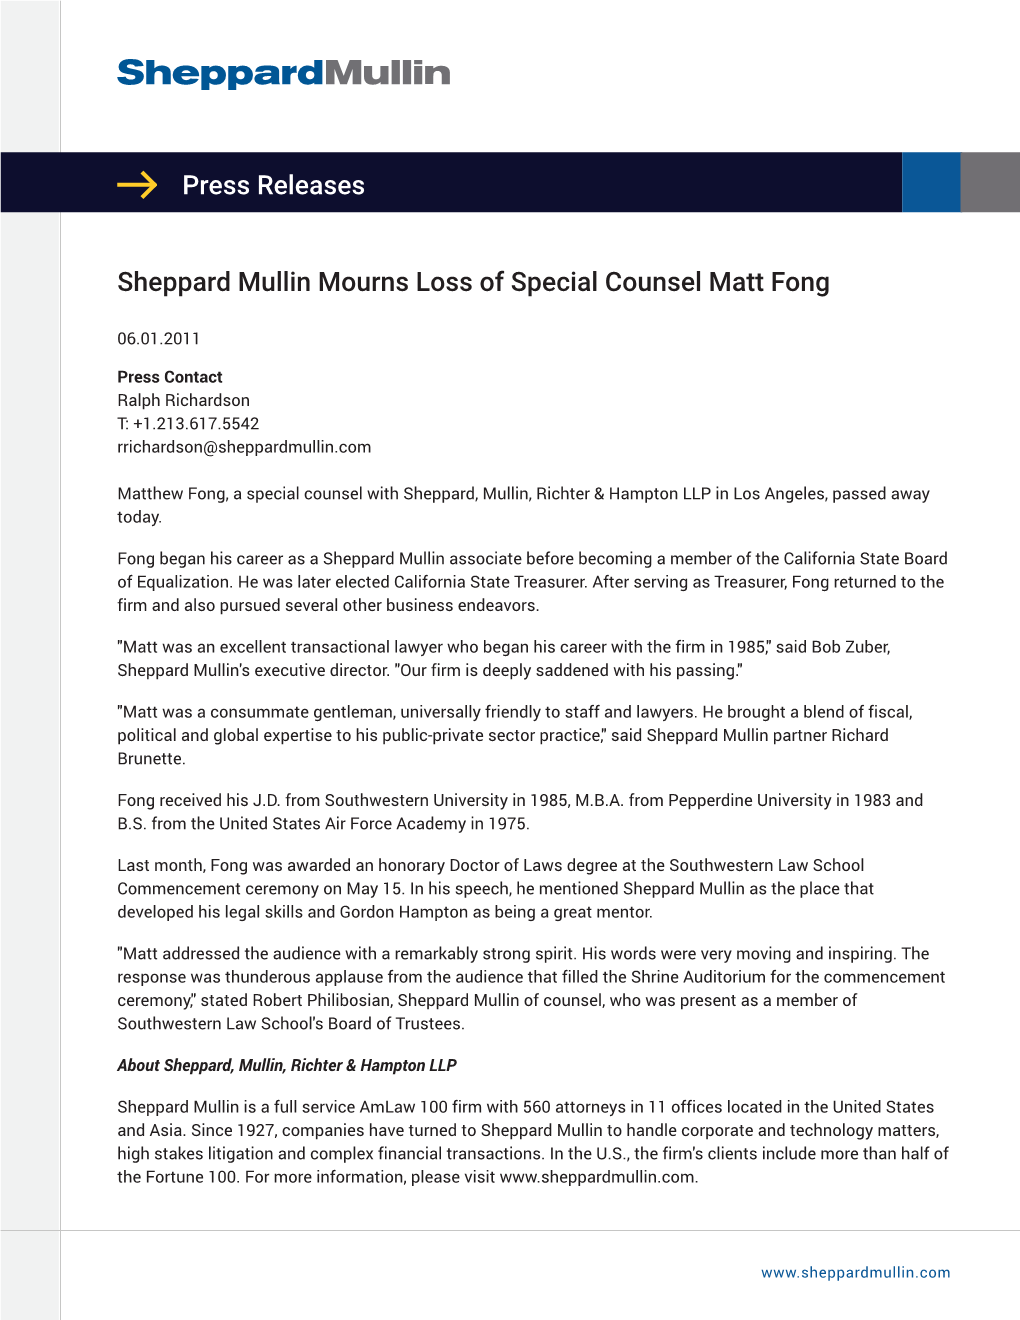 Press Releases Sheppard Mullin Mourns Loss of Special Counsel